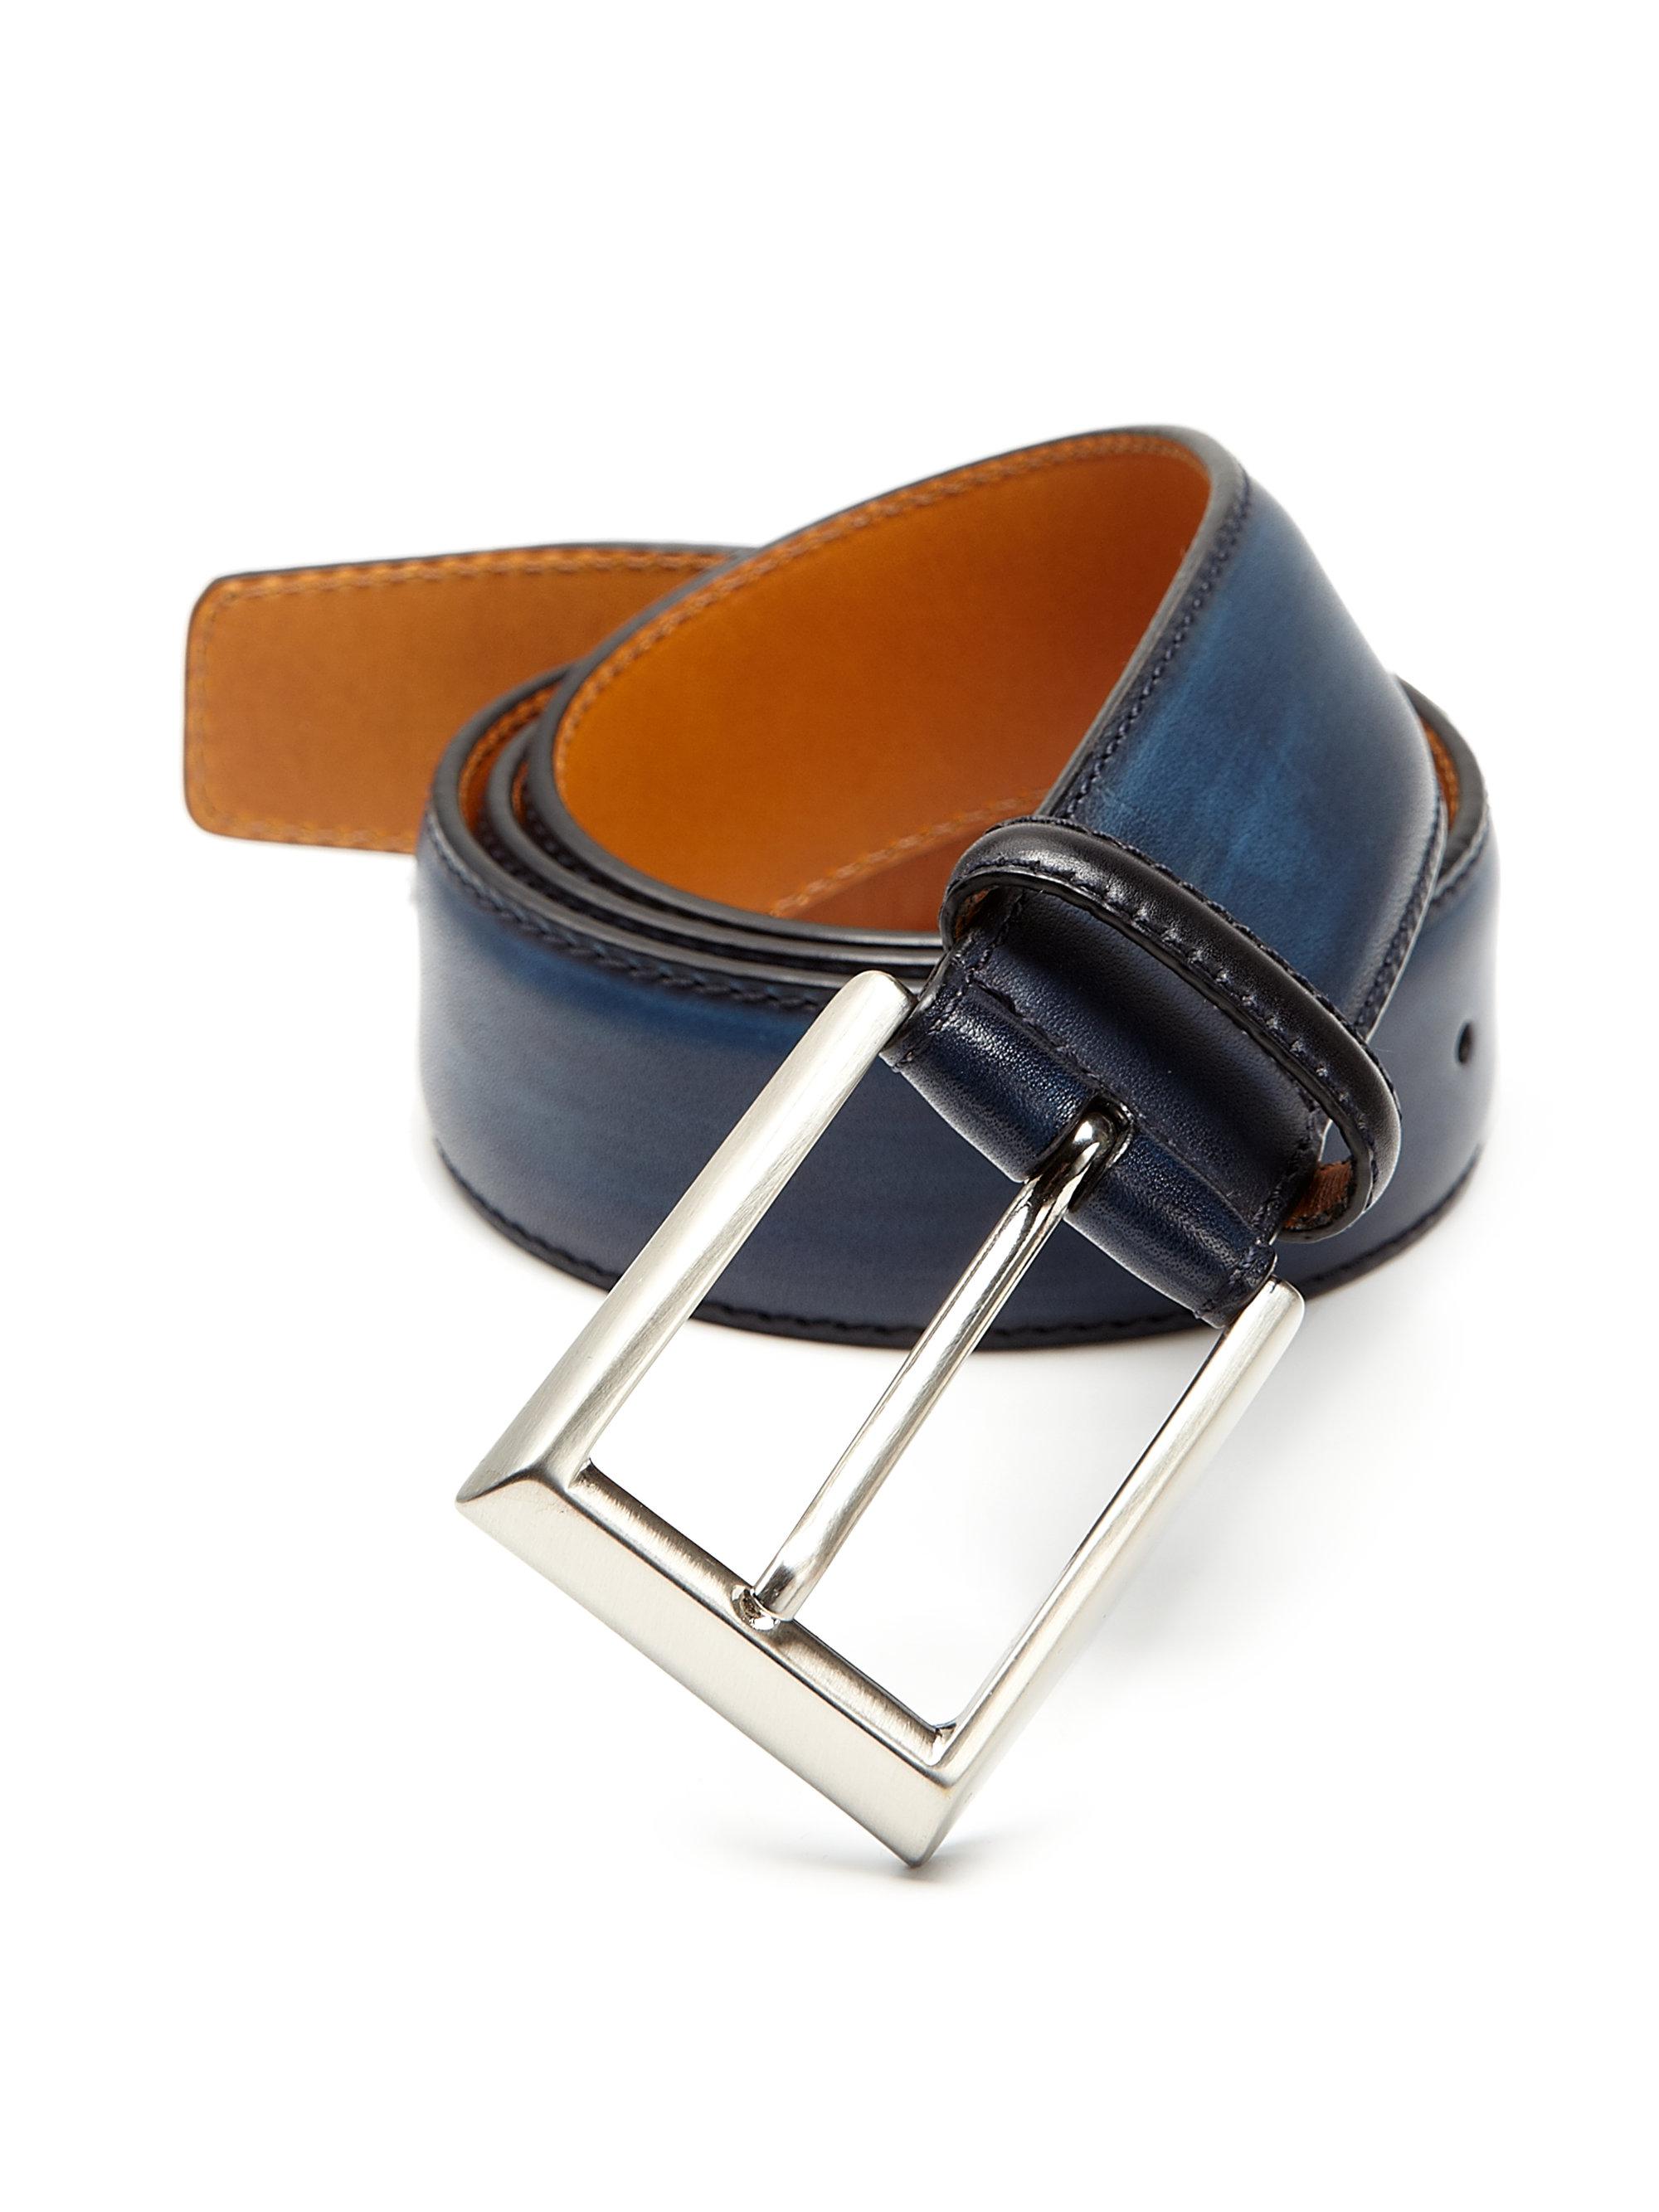 Lyst - Saks Fifth Avenue Saks Fifth Avenue By Magnanni Leather Belt in Blue for Men